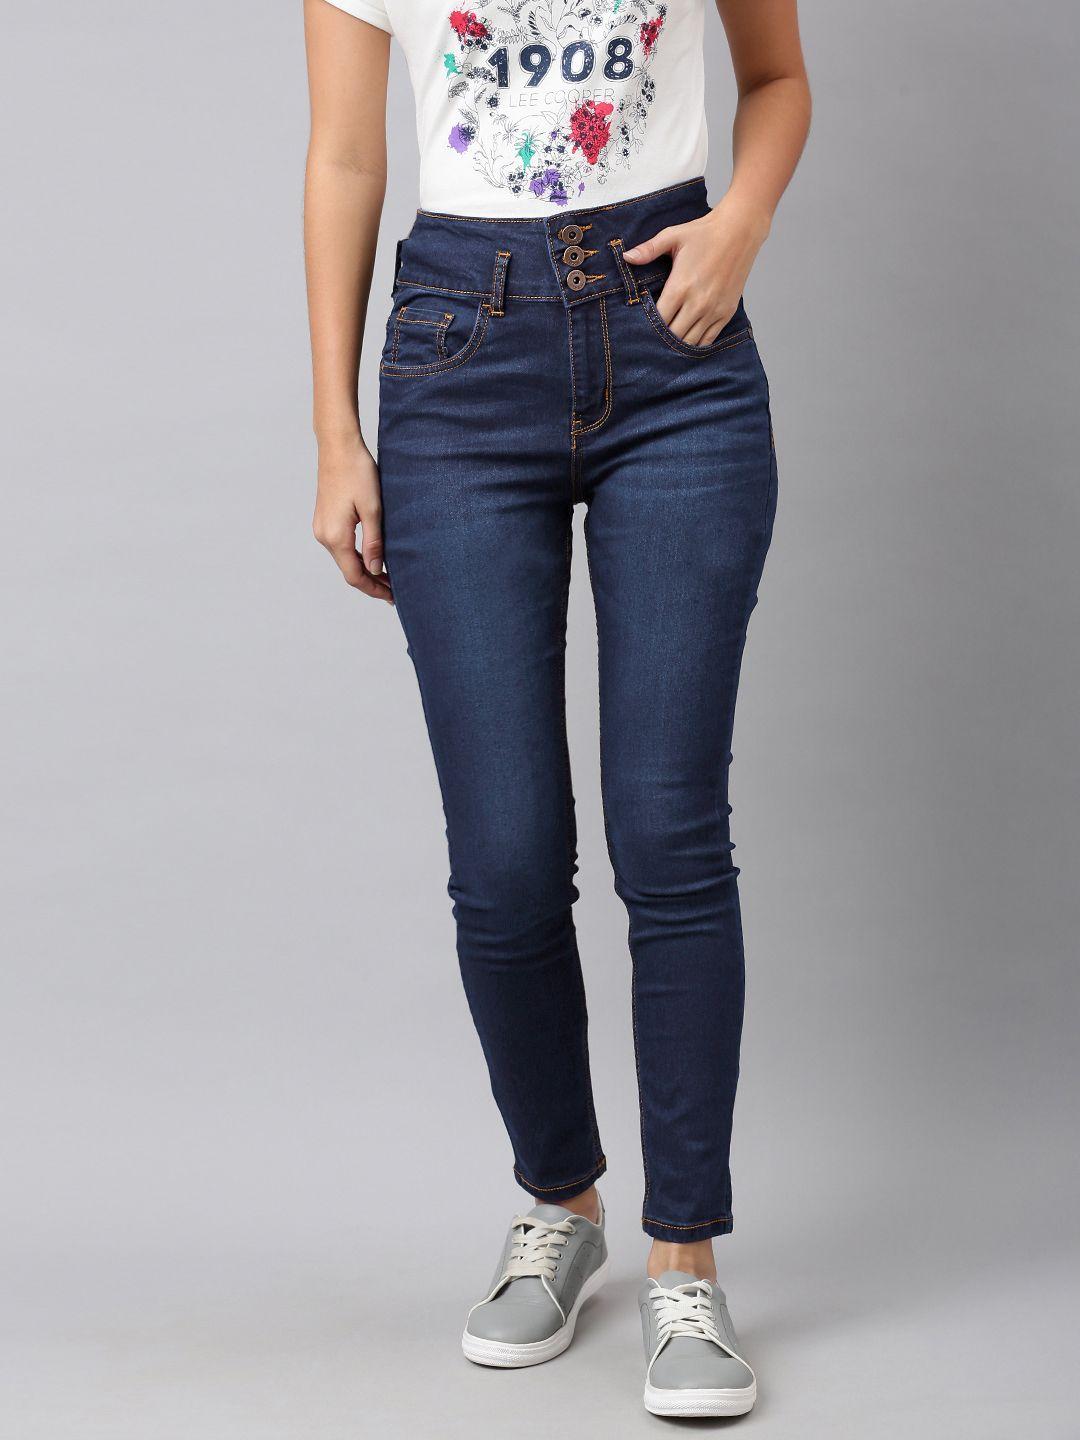 provogue-women-blue-skinny-fit-mid-rise-clean-look-jeans